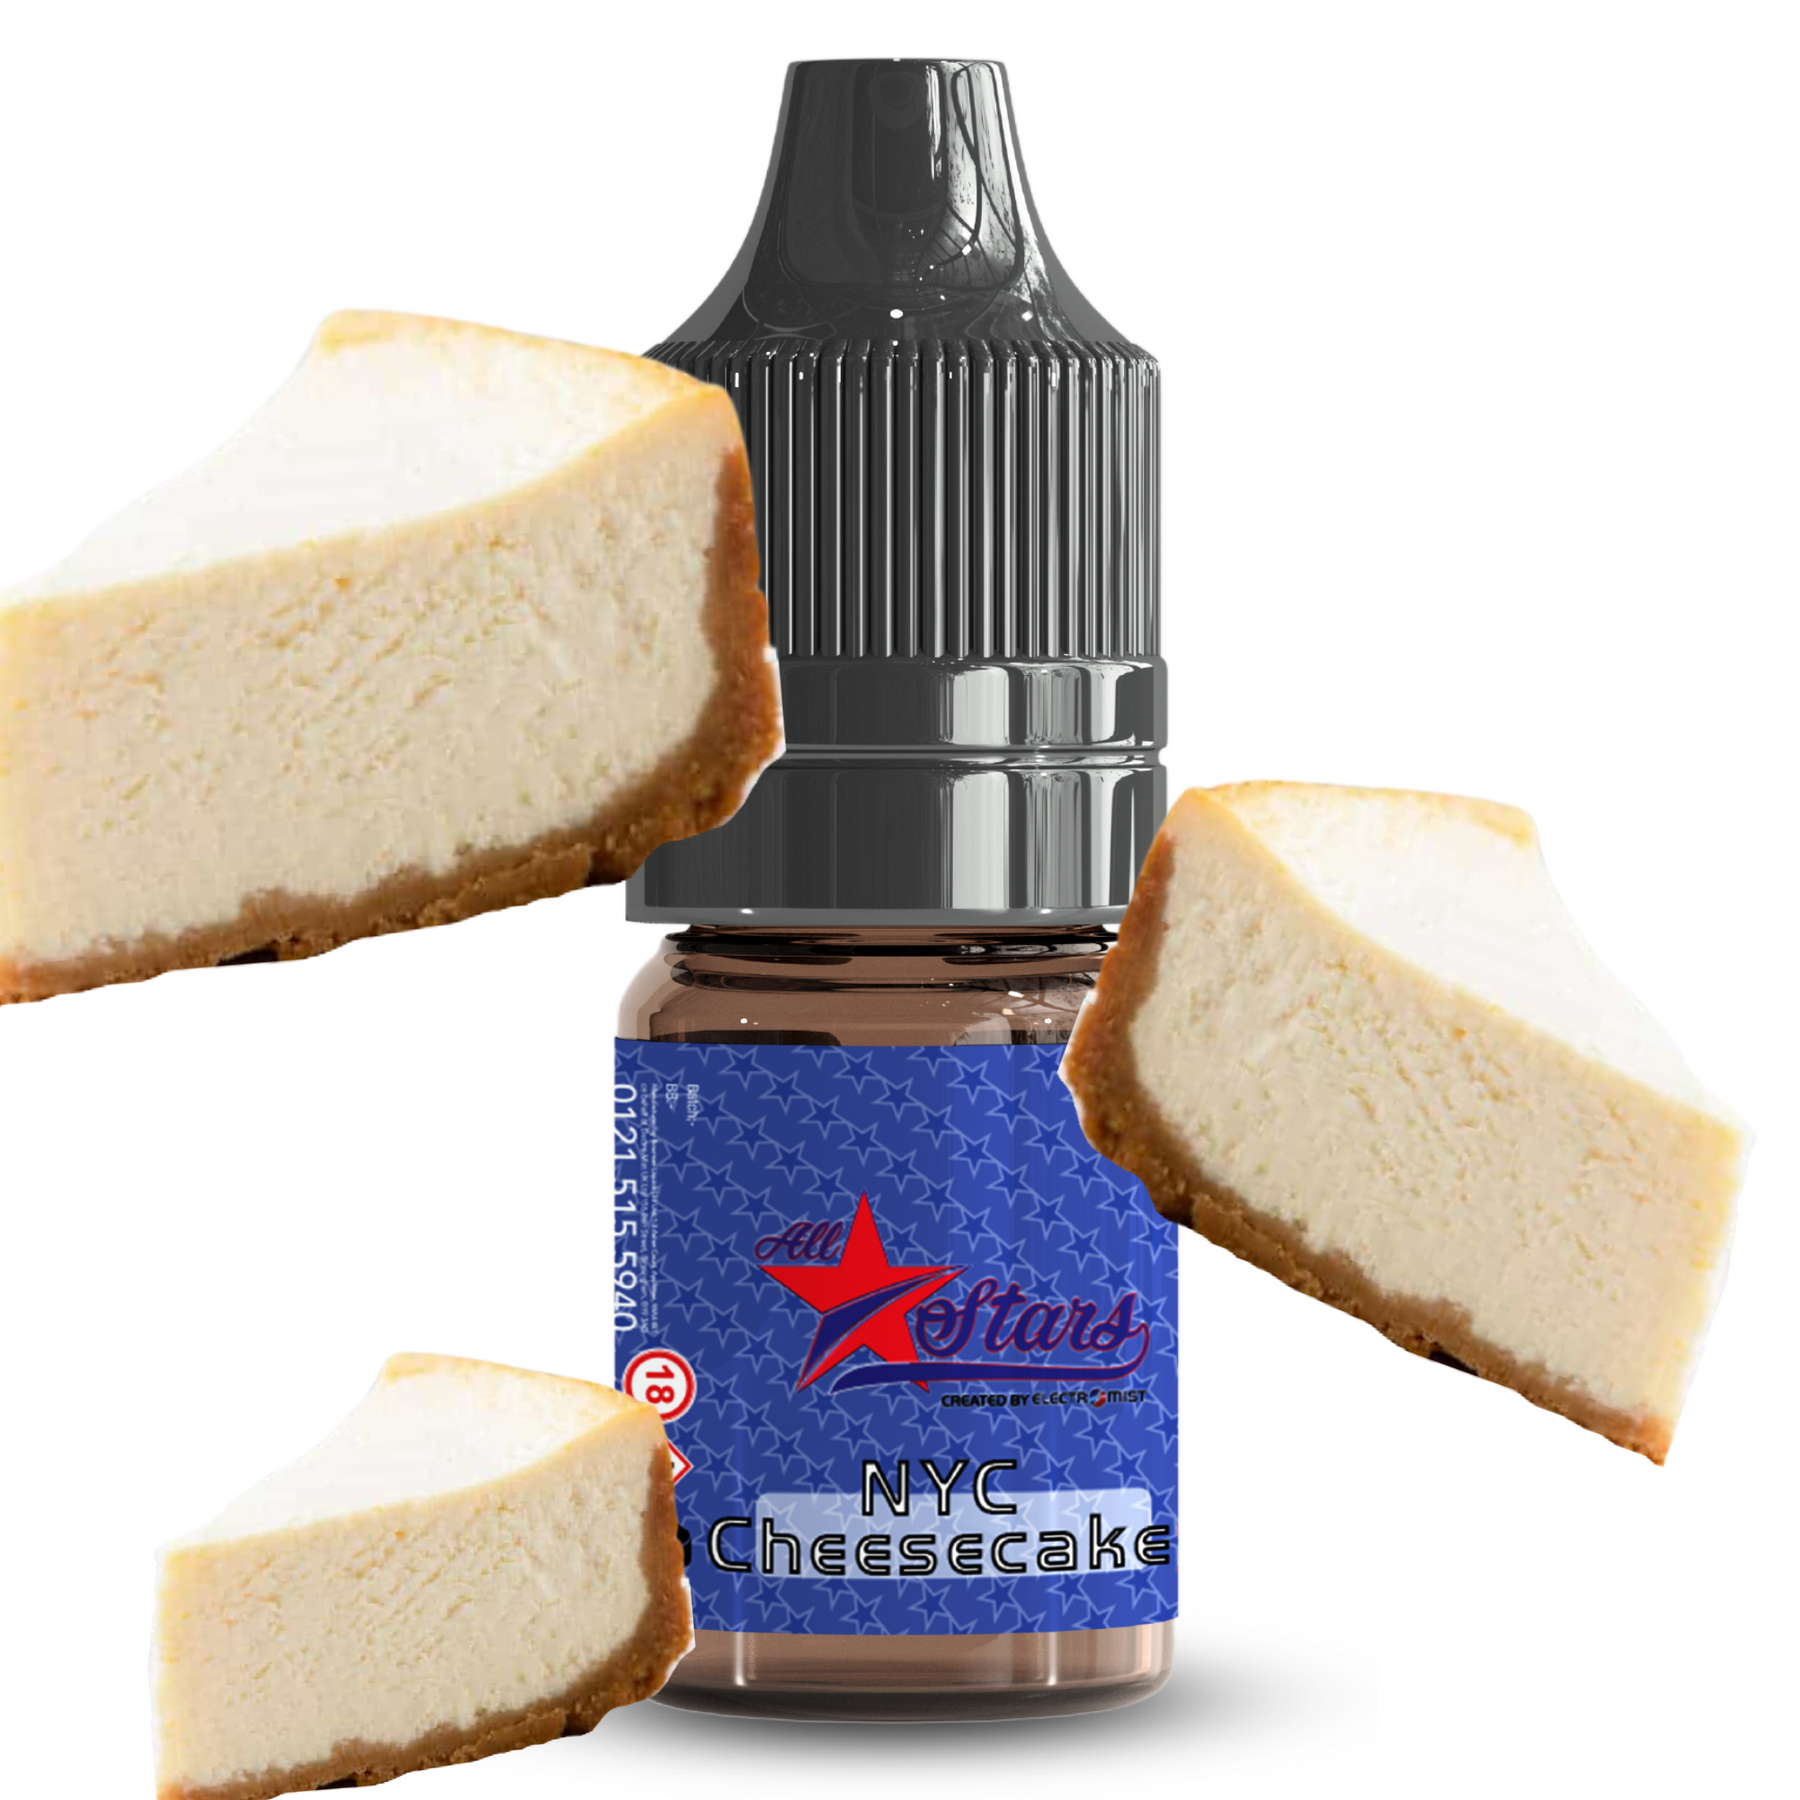 All Stars E-Liquid from the vape brand you can trust, Electromist, . Get your taste buds ready for a flavour sensation, NYC Cheesecake. Nicotine Content: 6mg/12mg/18mg Products may contain nicotine. For over 18s Only ejuice, vape pen, eliquid, e cigarette, 10ml, vaping, cloud, PG, VG, 60/40, vape liquid, Flavour, TPD